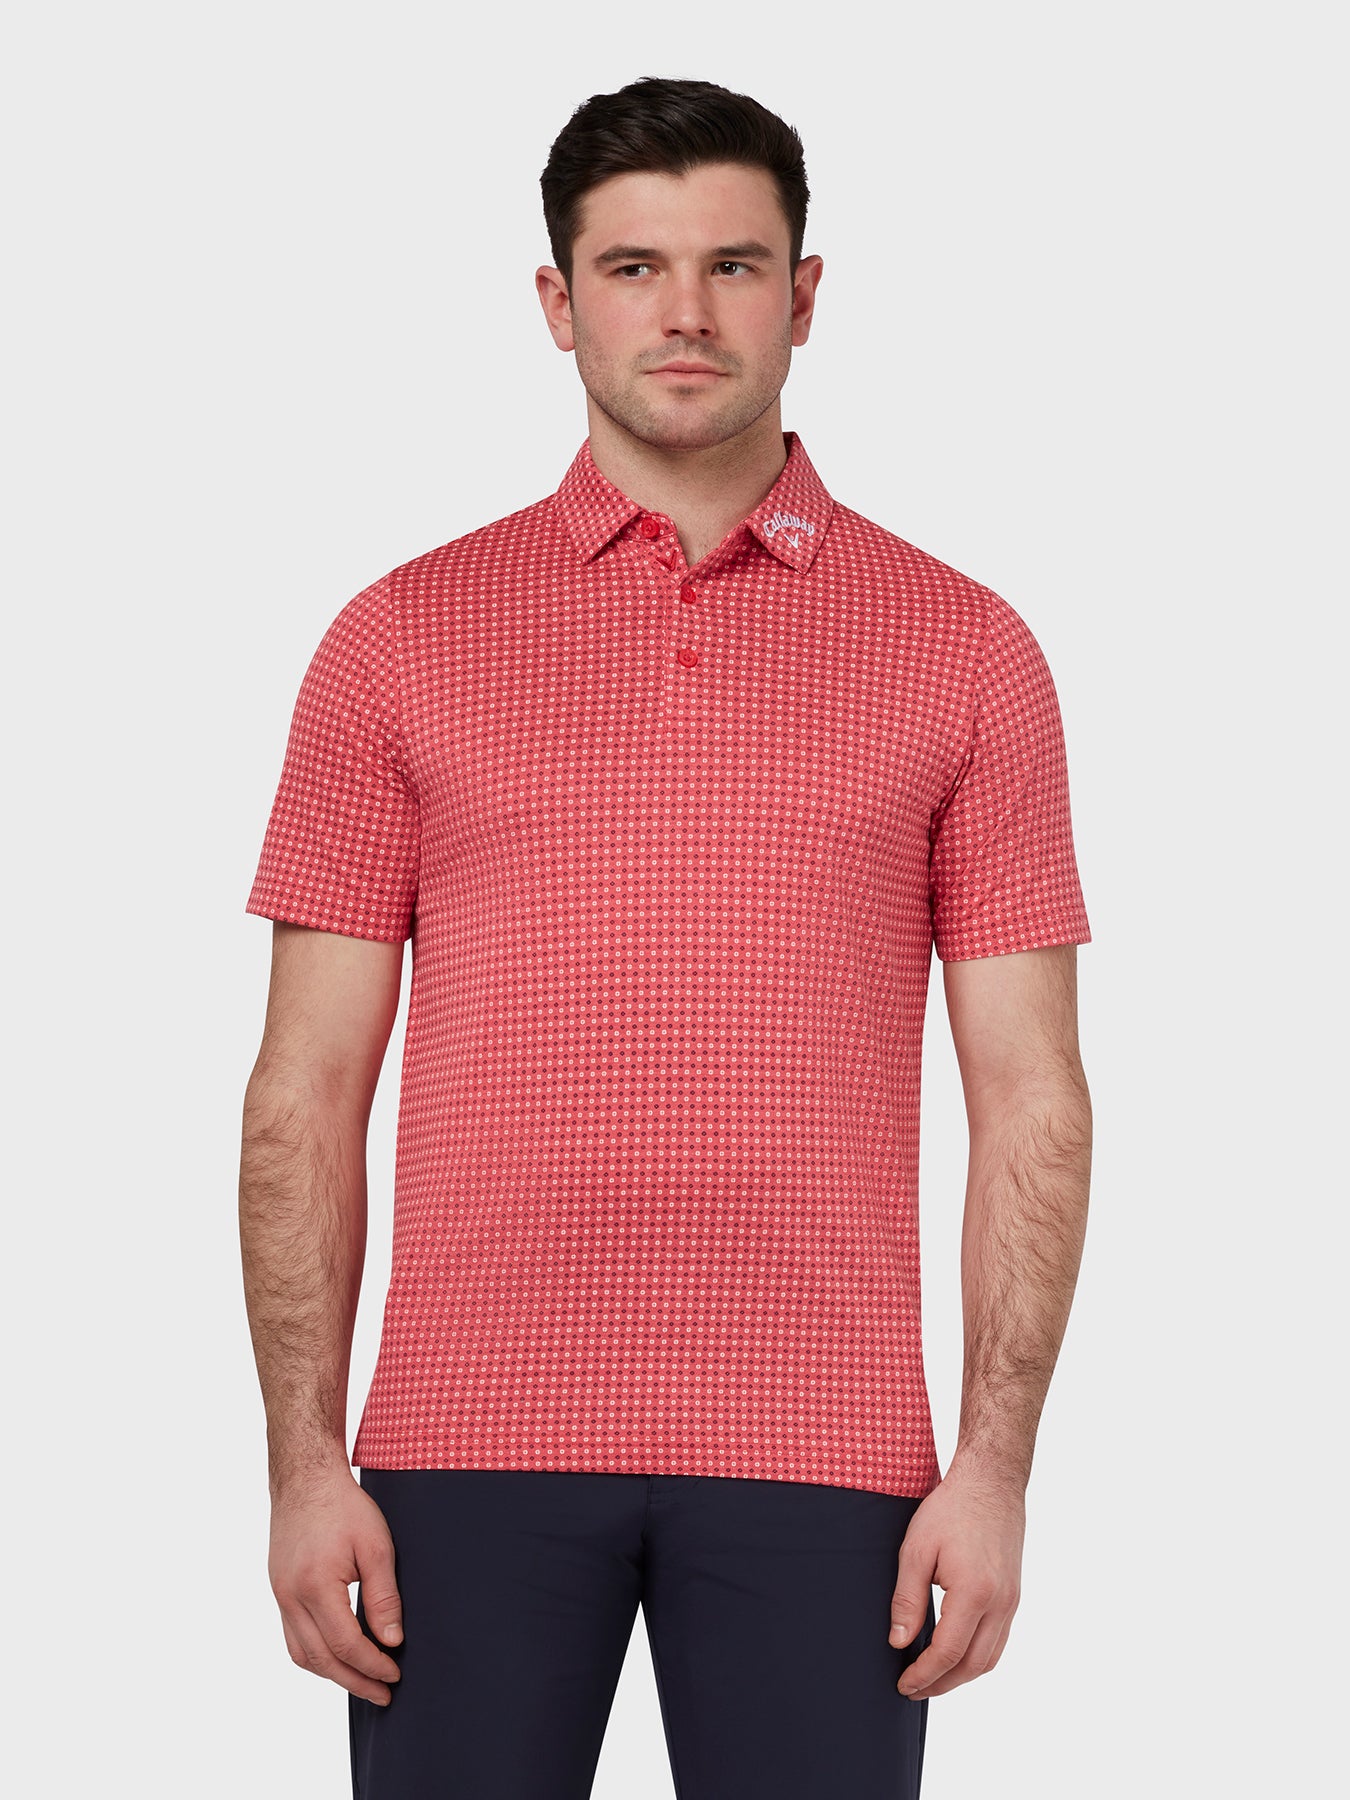 View Soft Touch Micro Print Polo In Teaberry Heather Teaberry Heather XL information